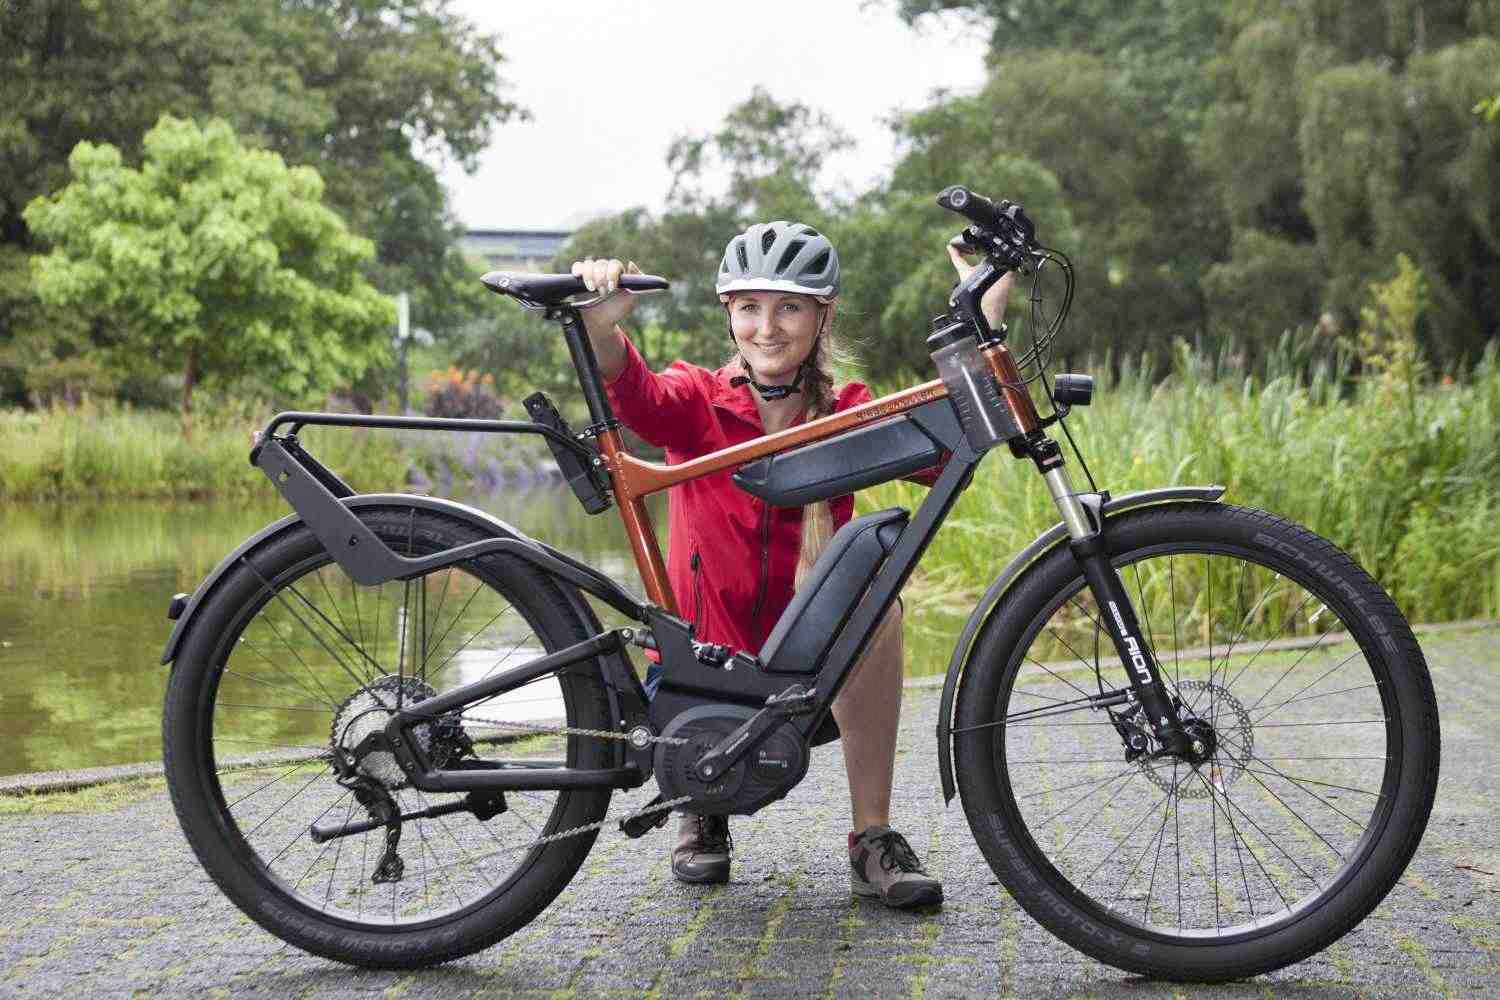 What is the best brand of electric bike?